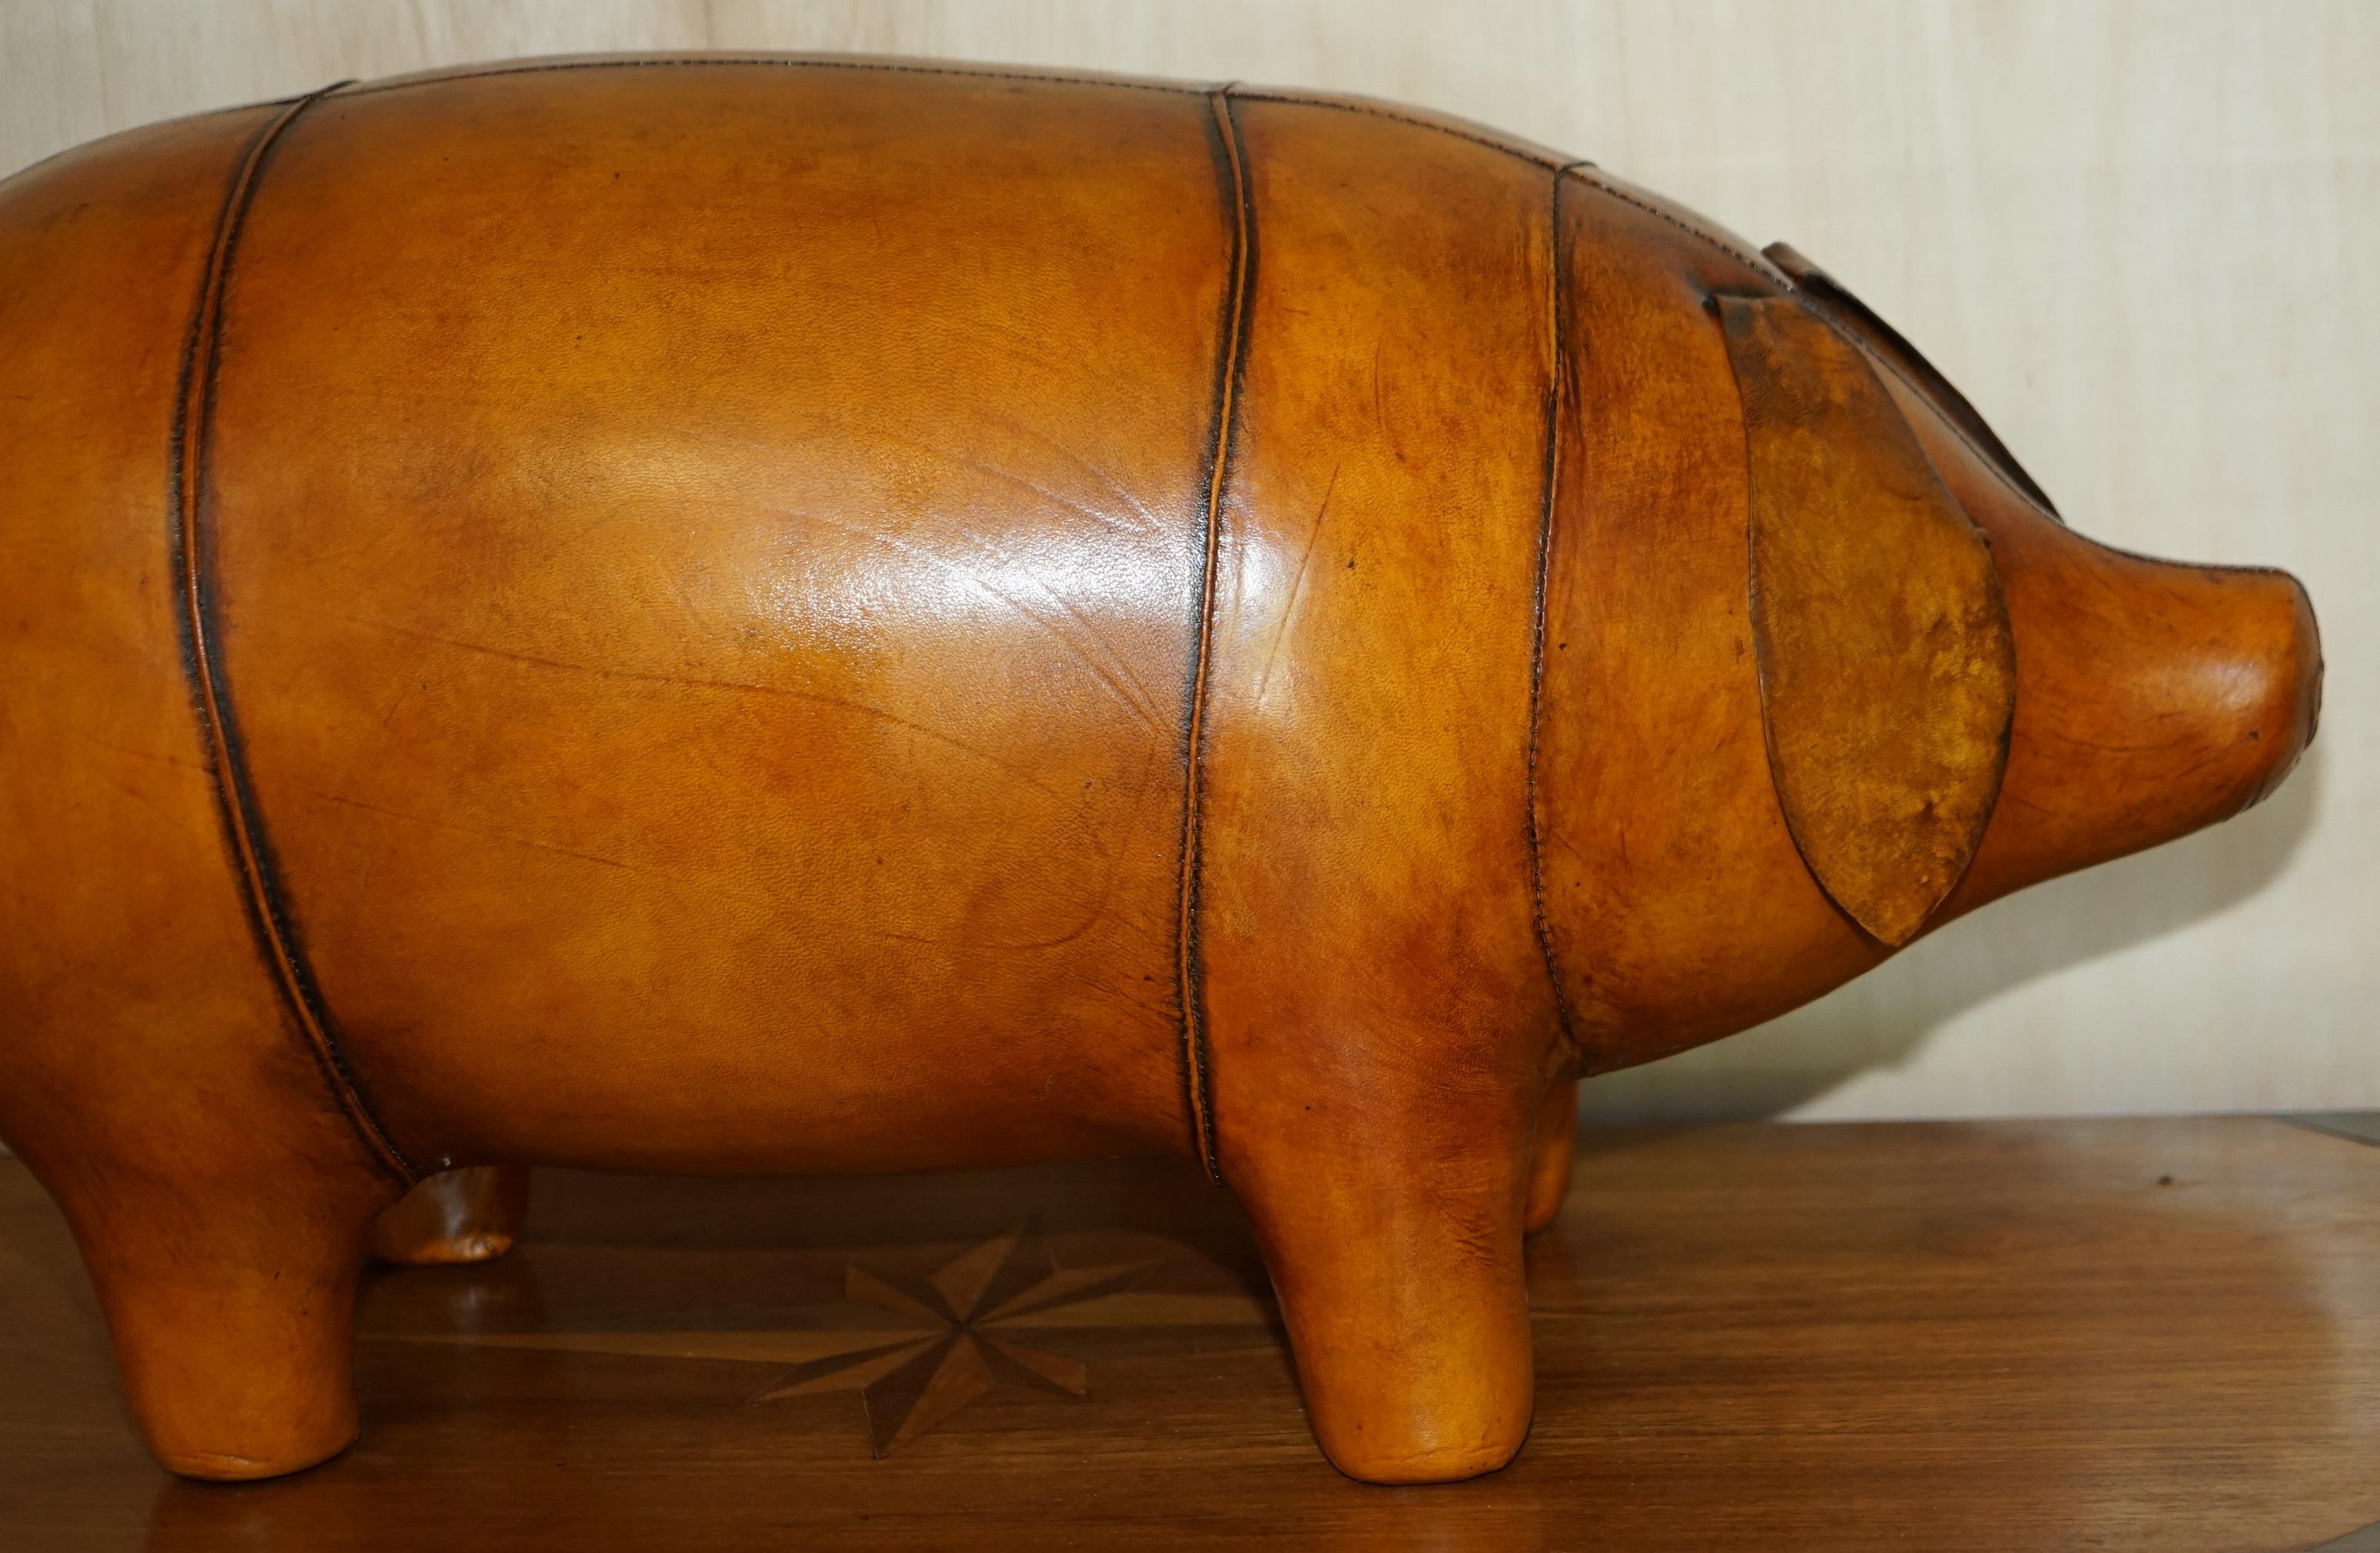 NEUES OLD STOCK LIBERTY Style OMERSA BROWN LEATHER PIG FOOTSTOOL LARGE AND MEDiUM (Englisch) im Angebot